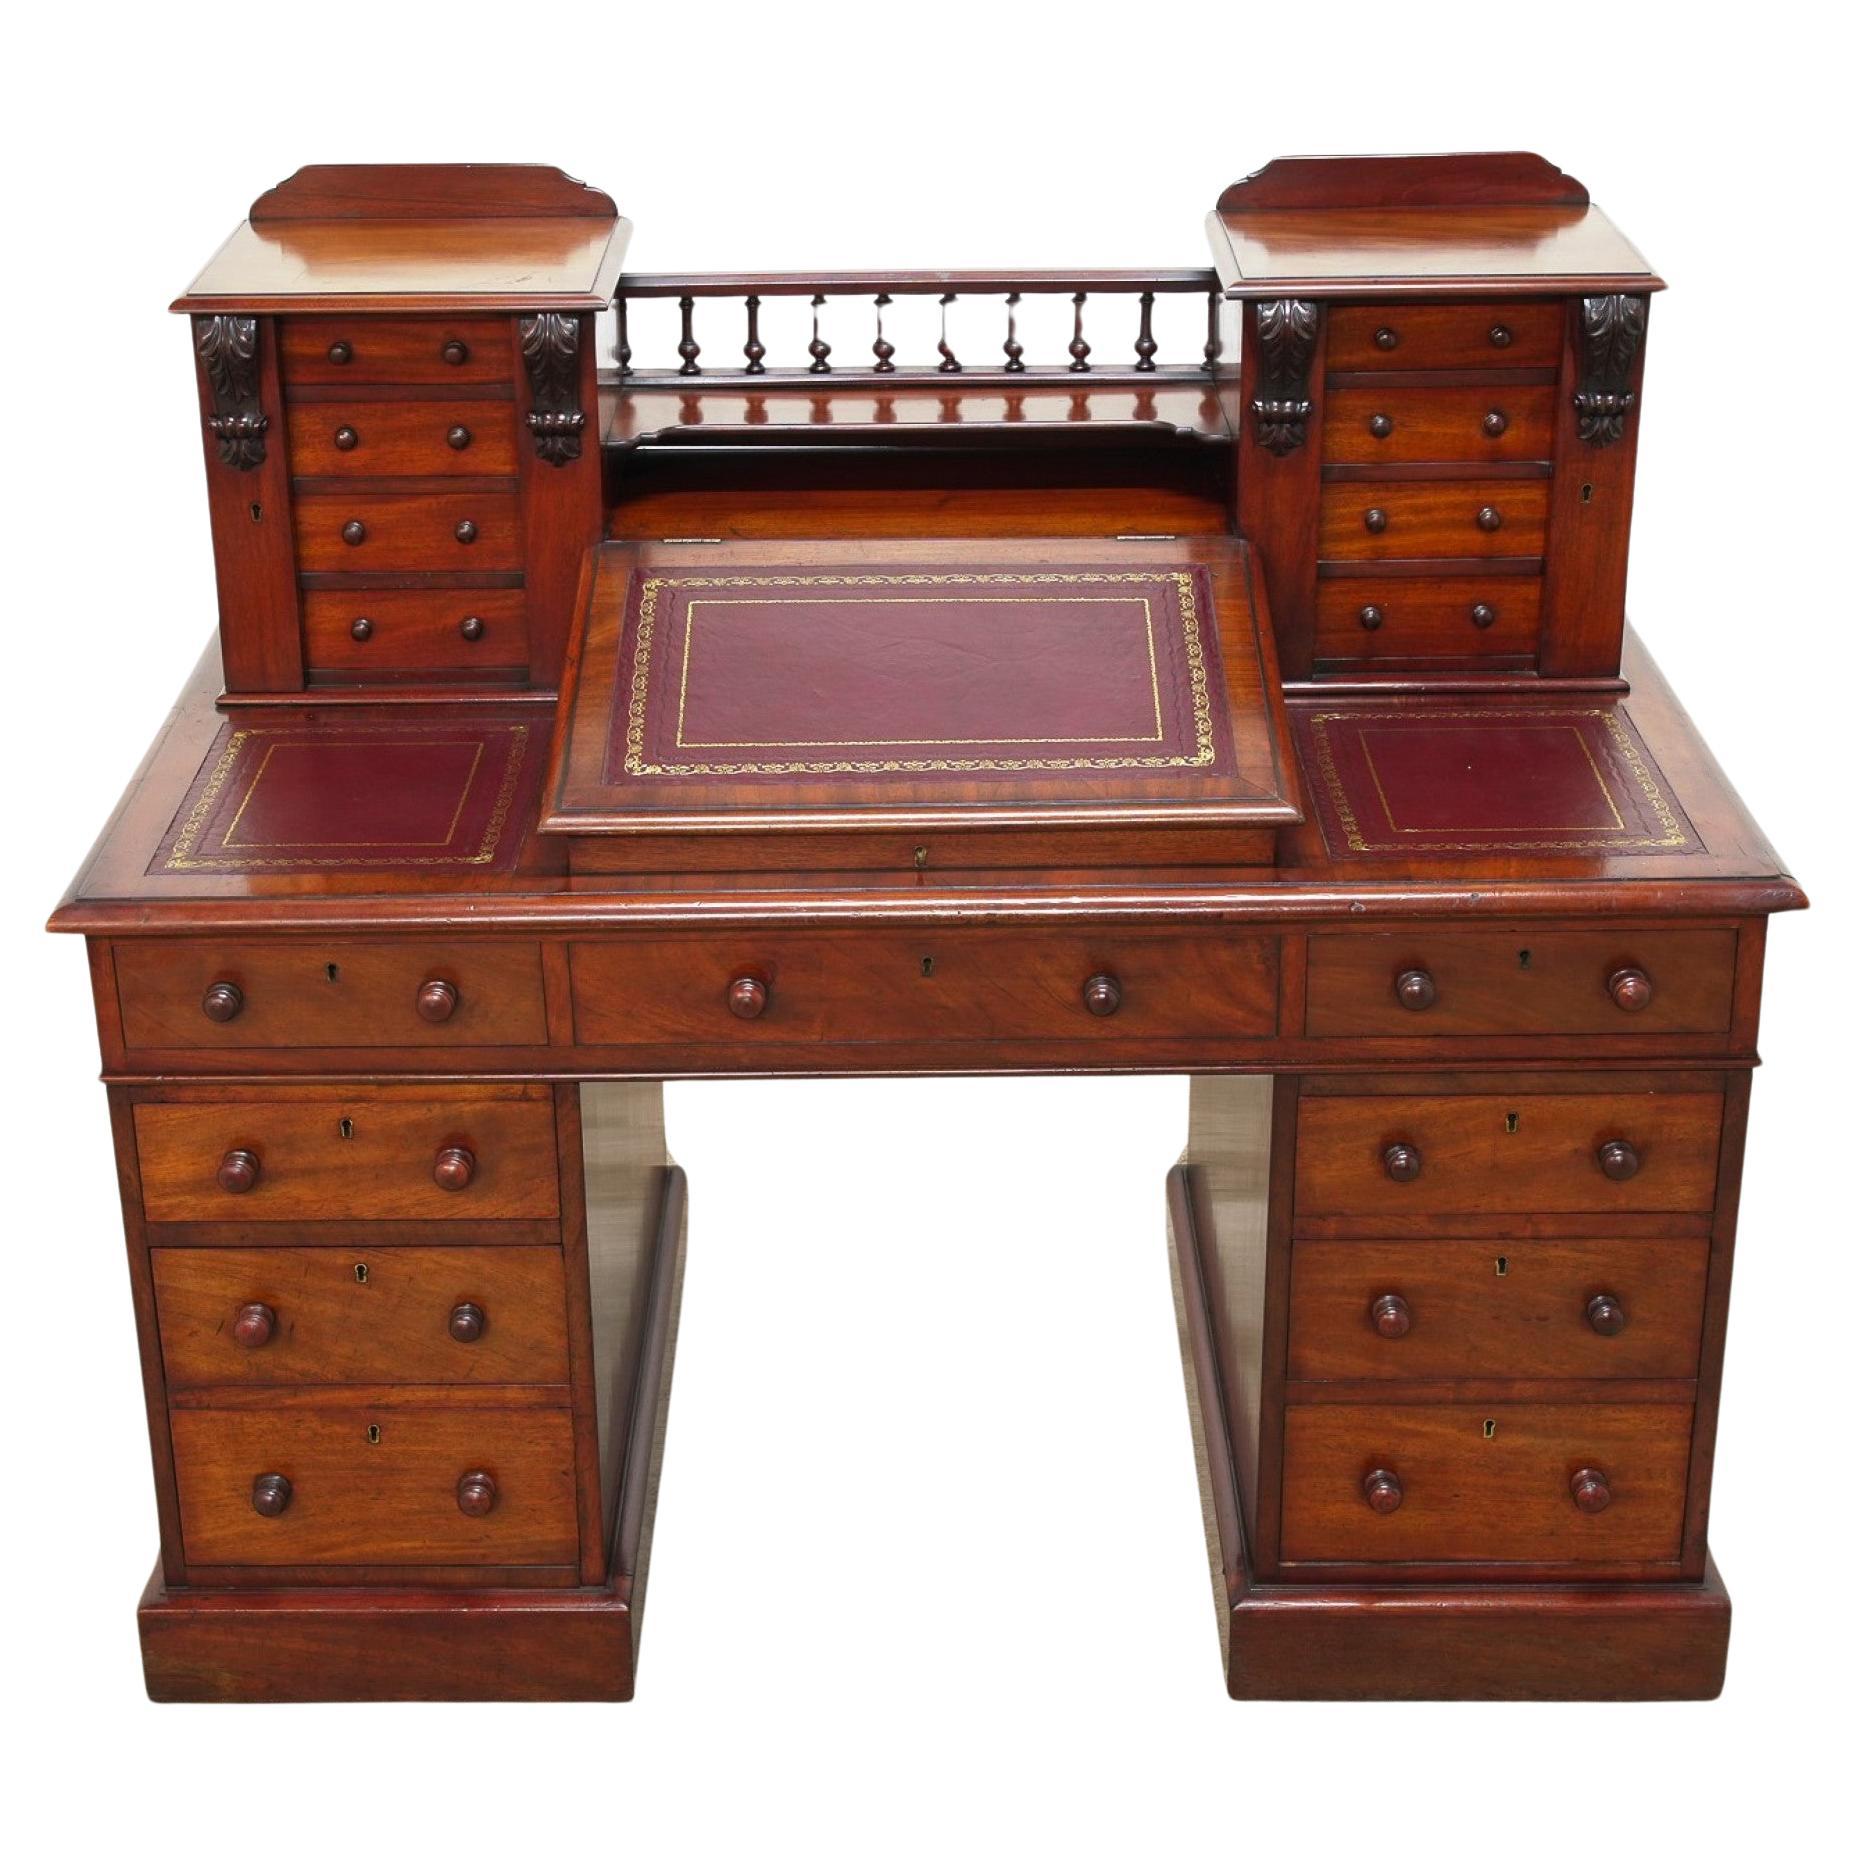 Victorian Charles Dickens Desk Mahogany Writing Table 1880 For Sale